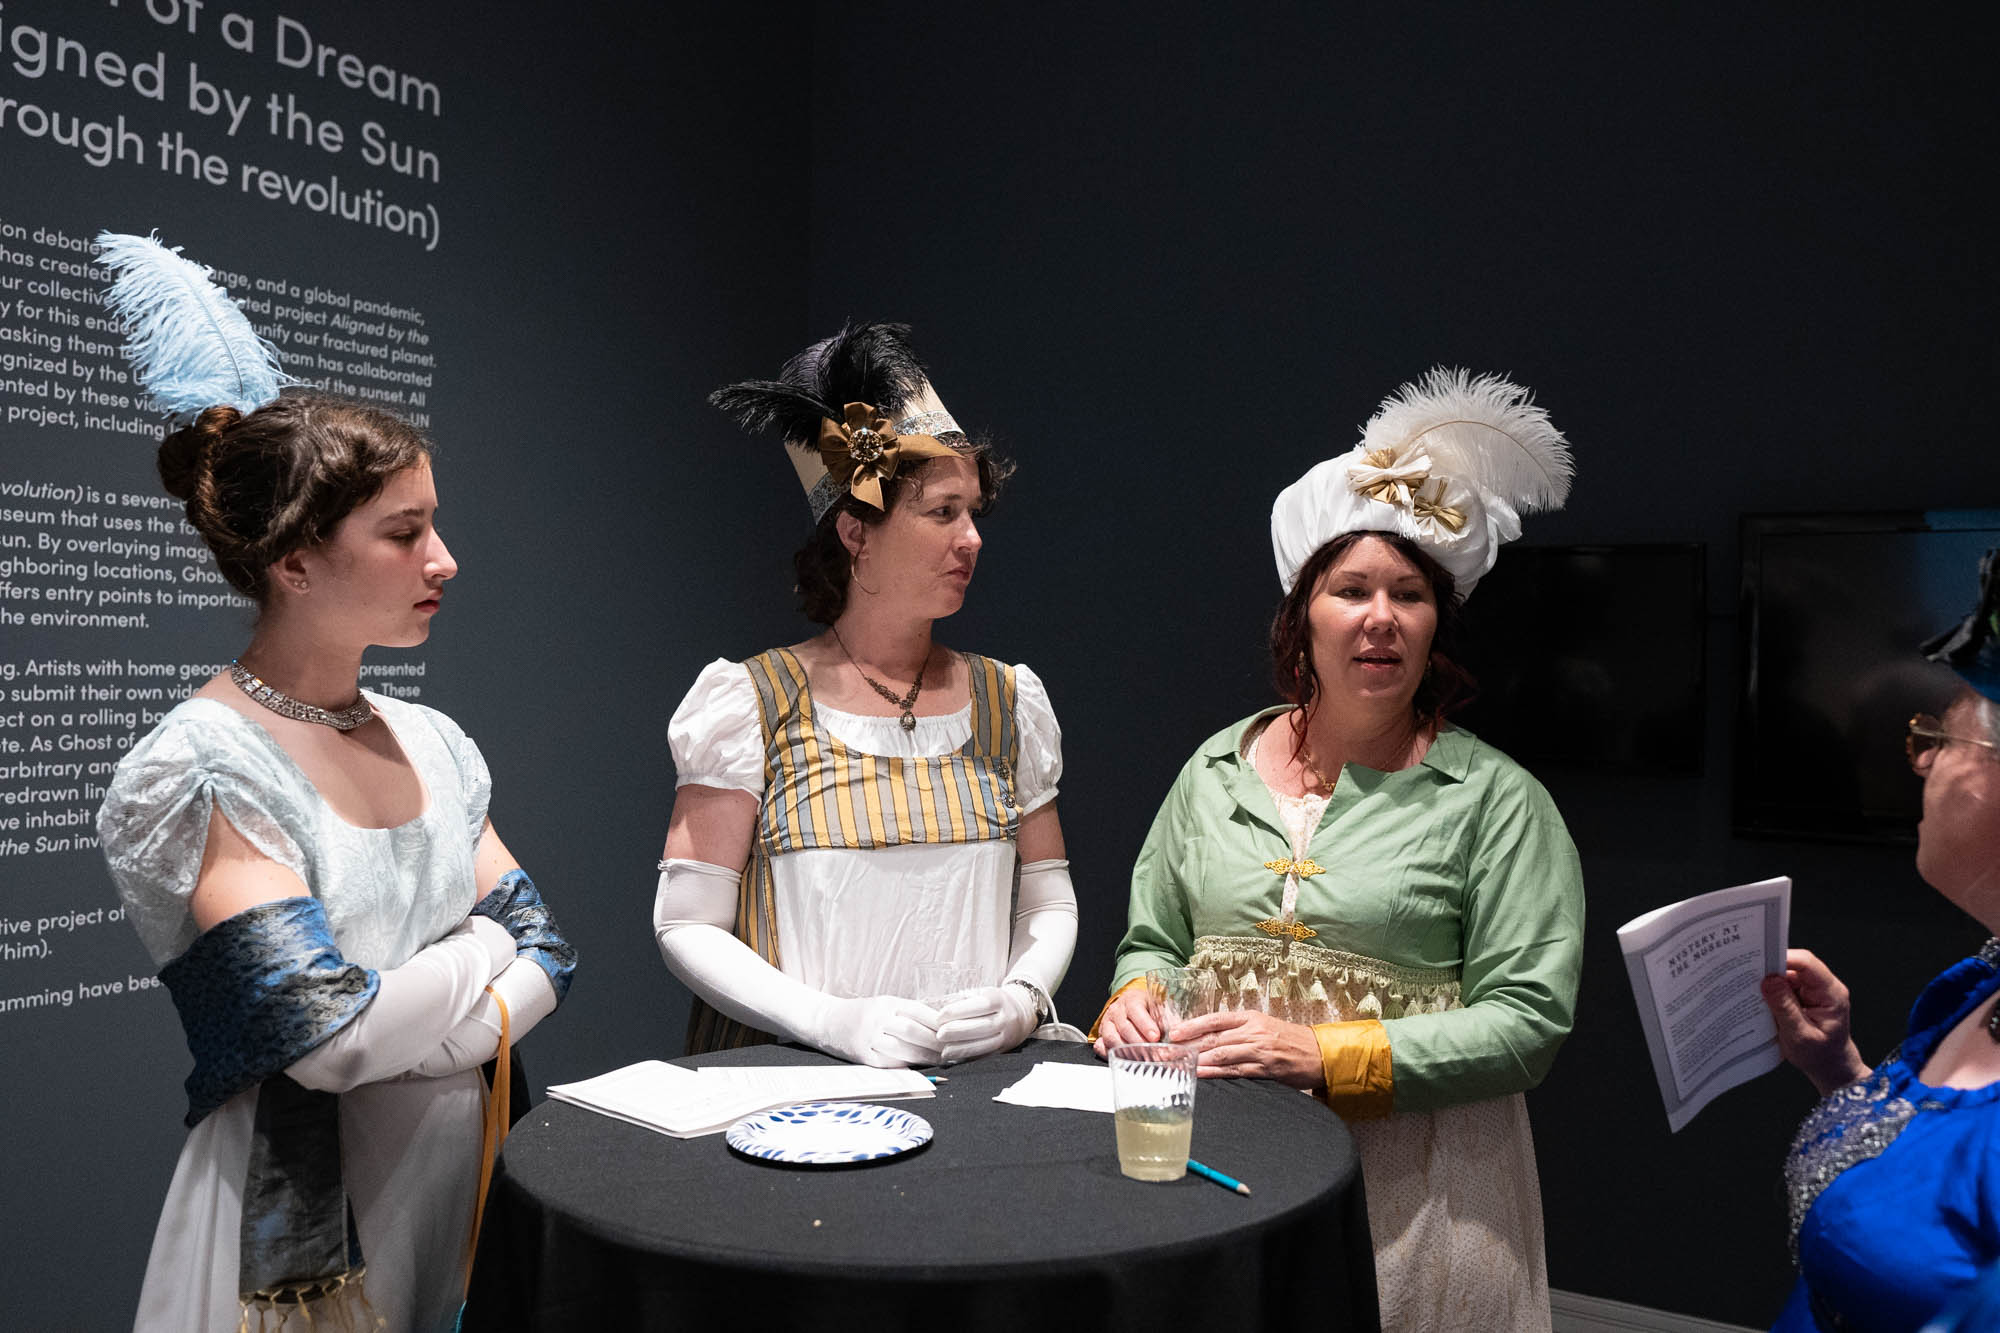 Attendees wearing Regency period costumes take a break during the mystery event.